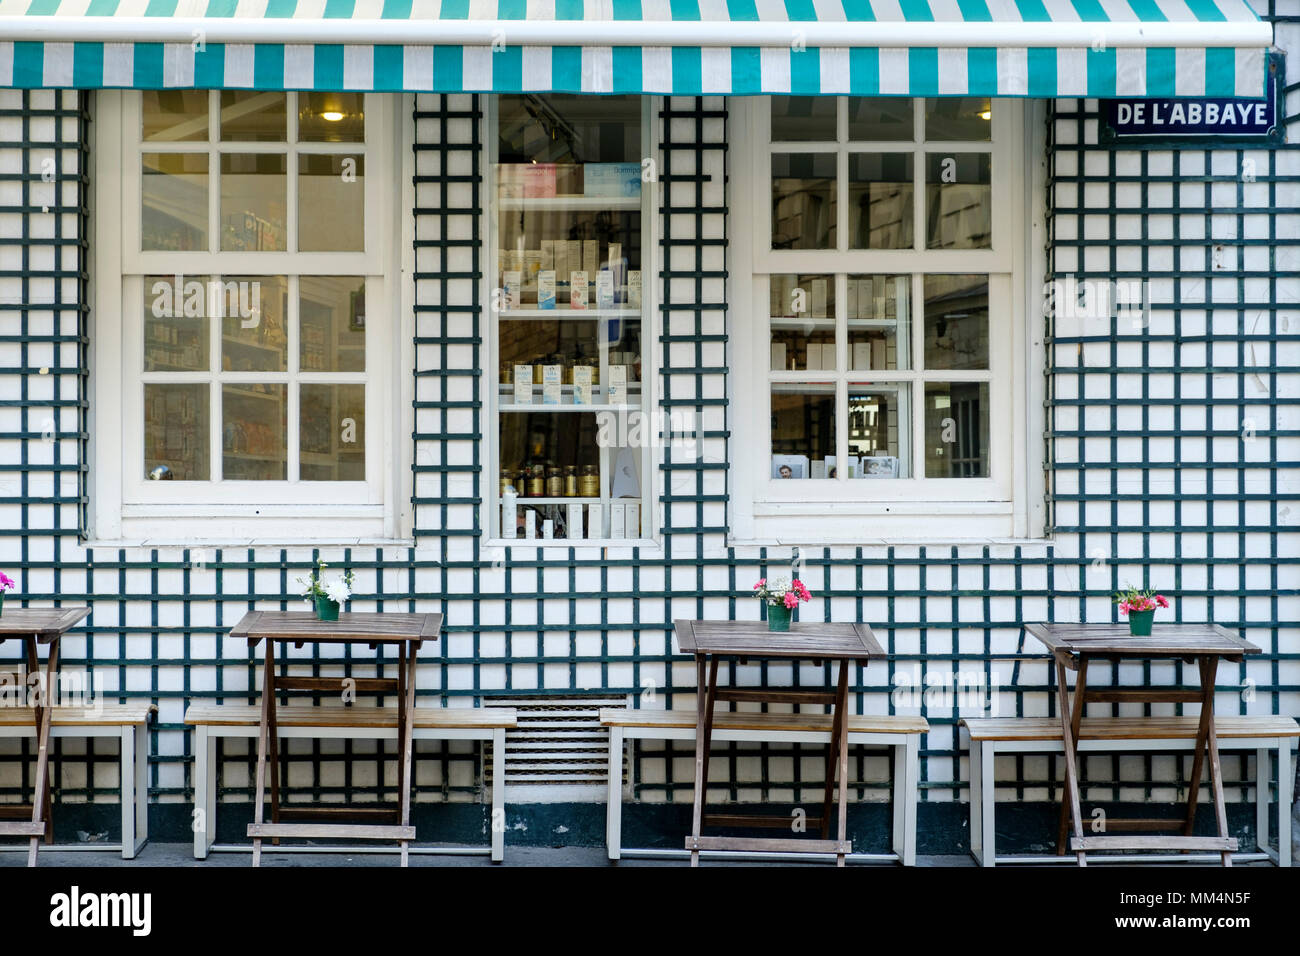 Cafe facade on street with tables and no people, Paris, France, Stock Photo